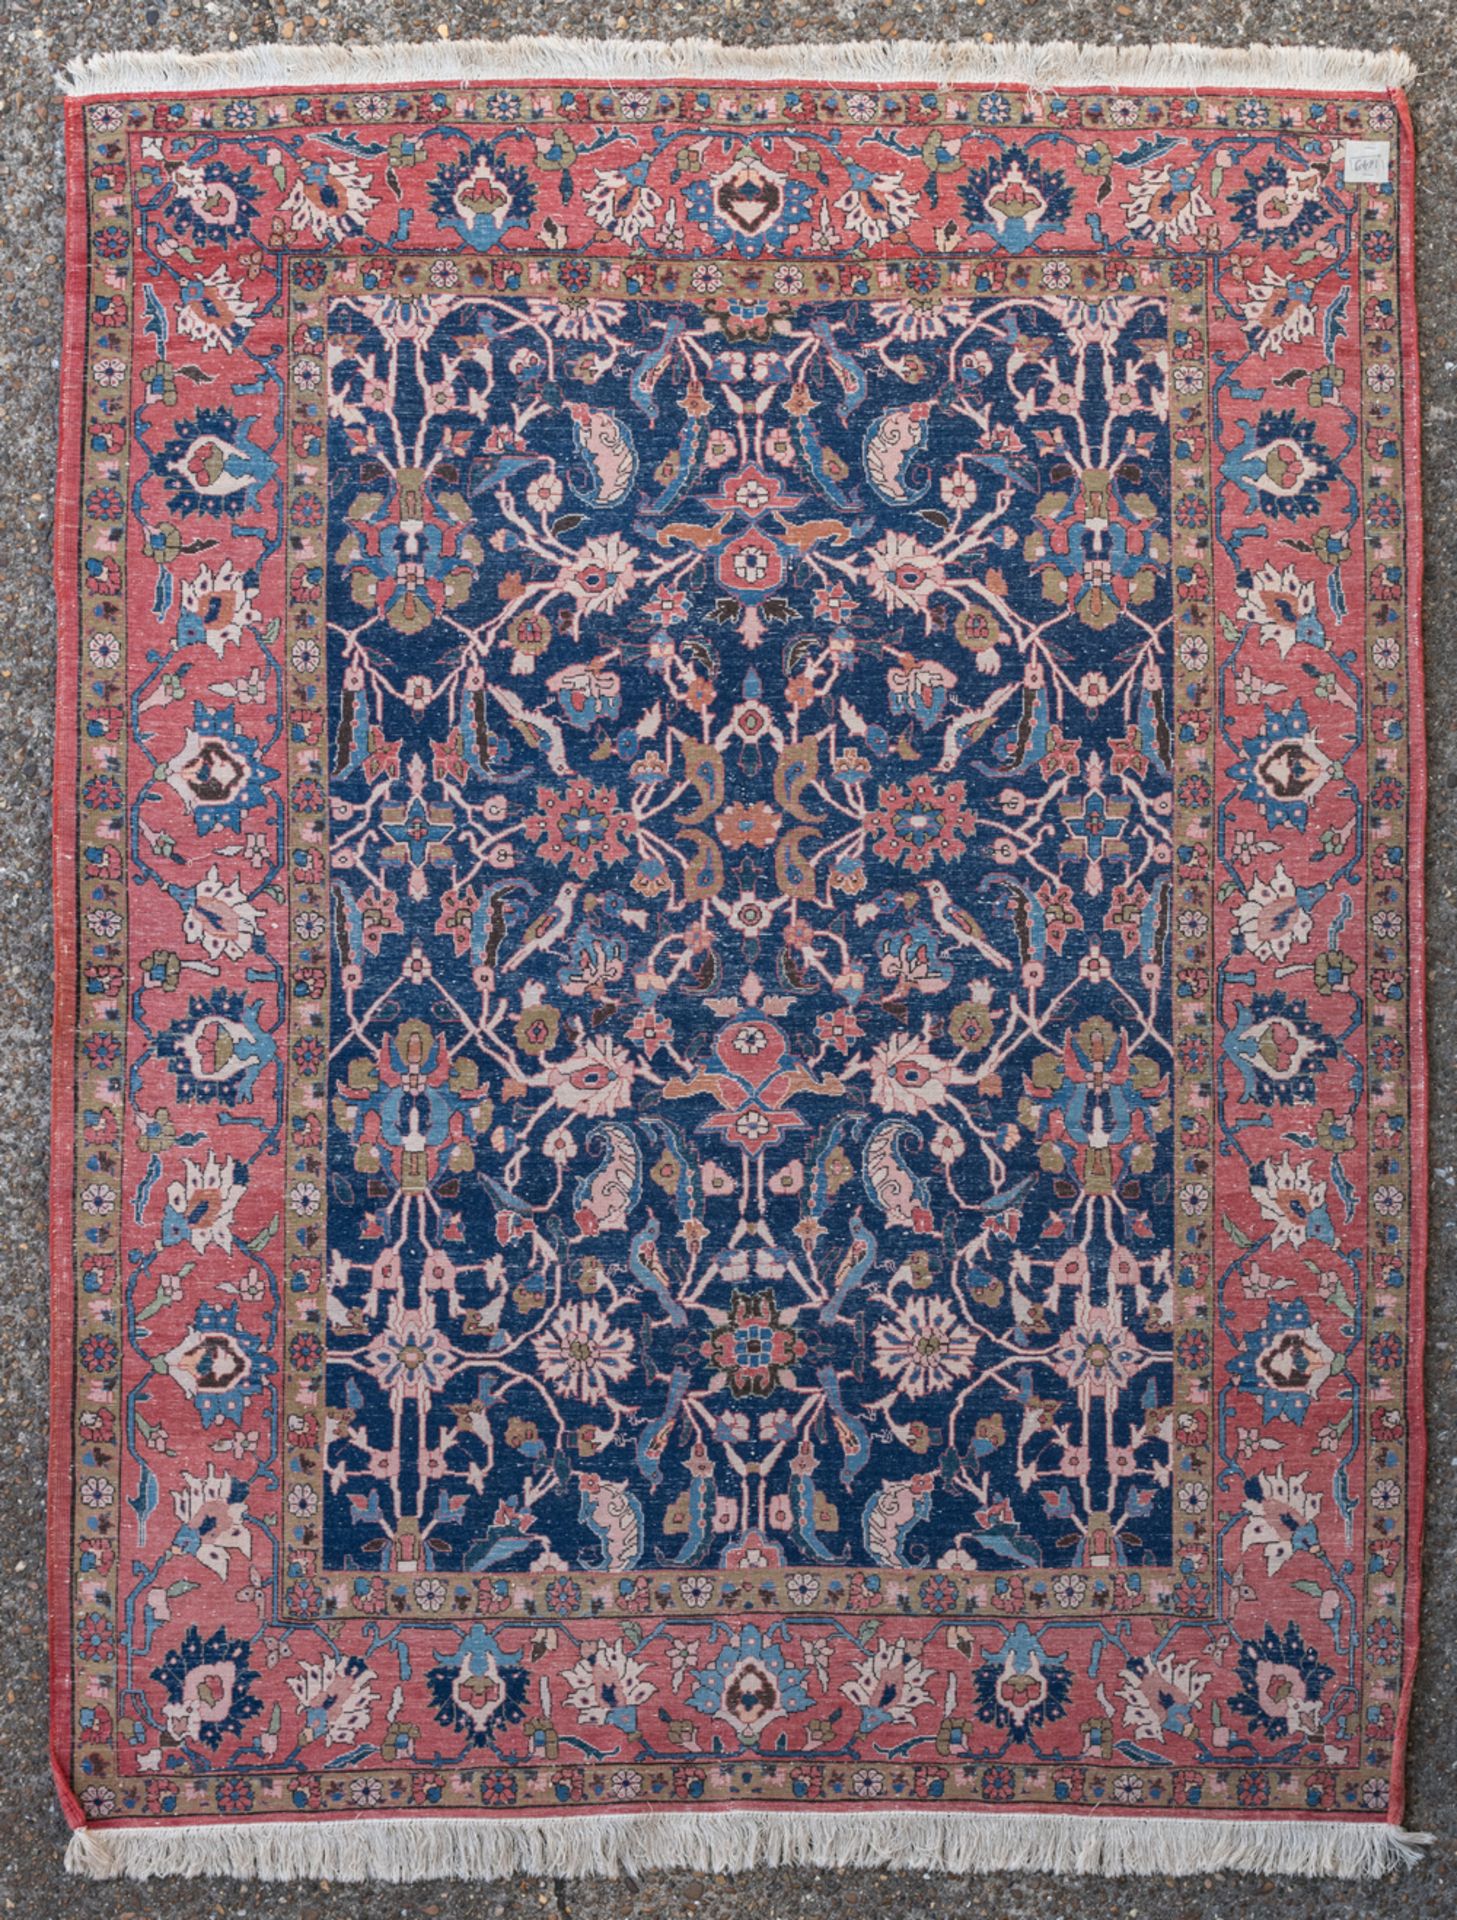 An Oriental rug with stylized floral motifs and birds, wool on cotton, 150 x 200 cm - Image 2 of 3